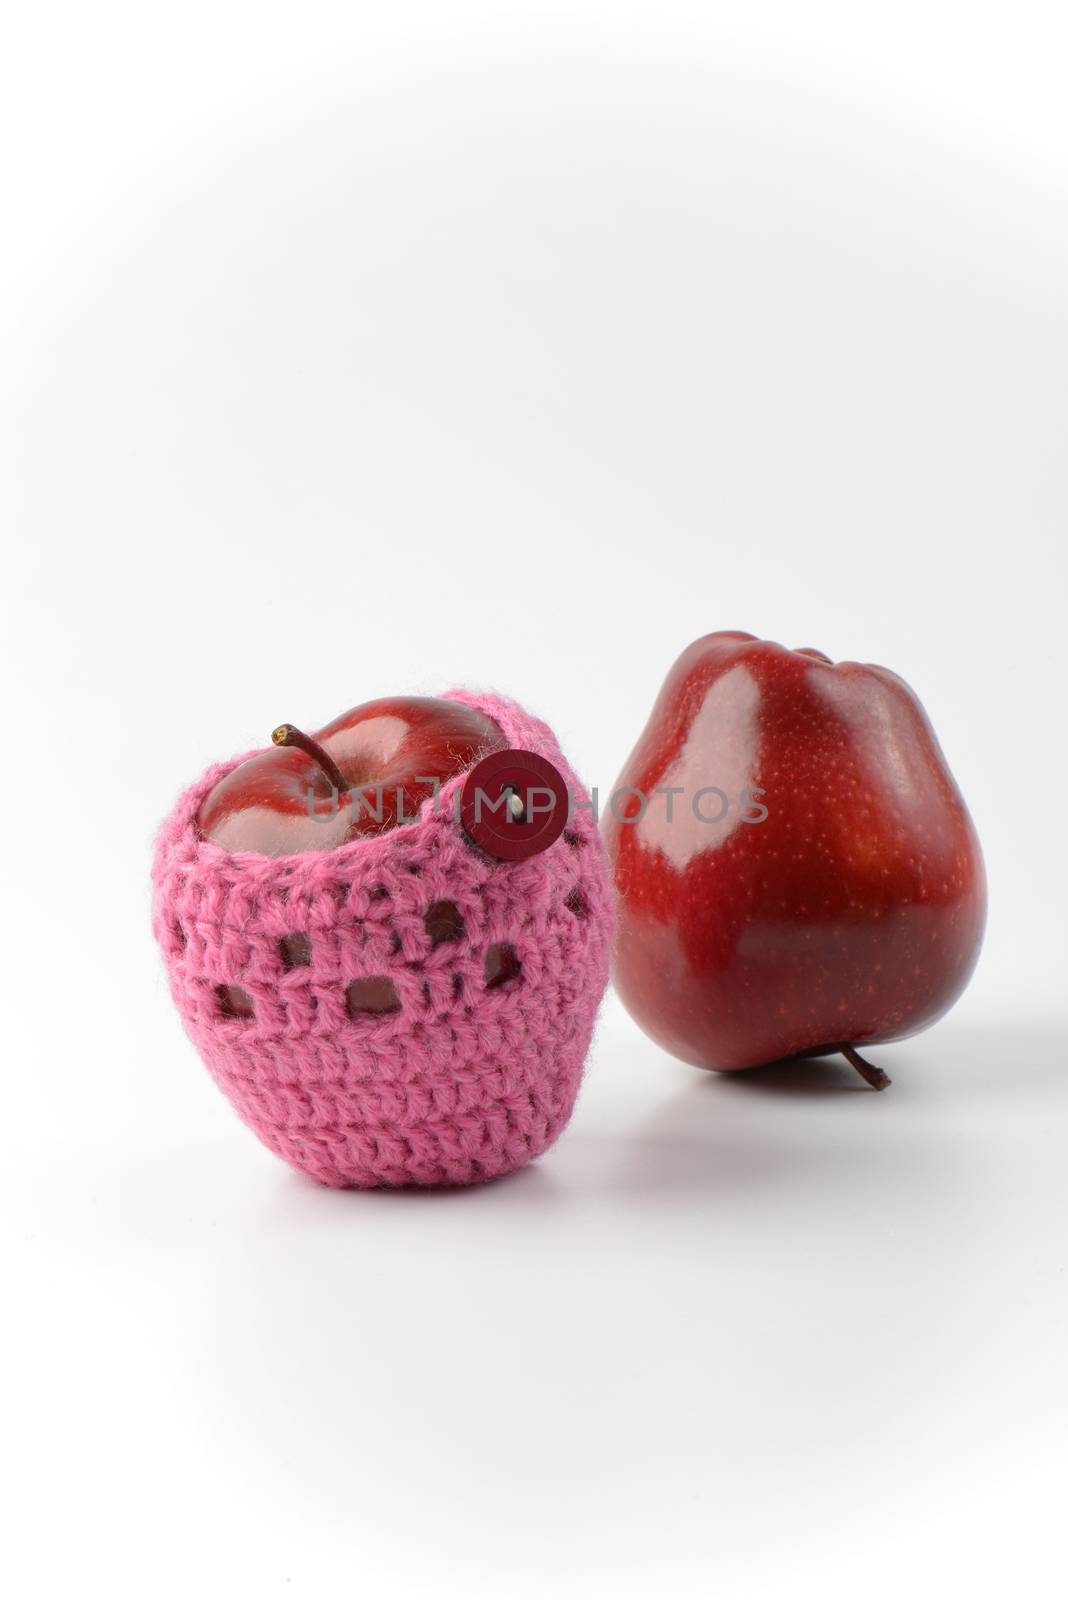 two red apples by Digifoodstock